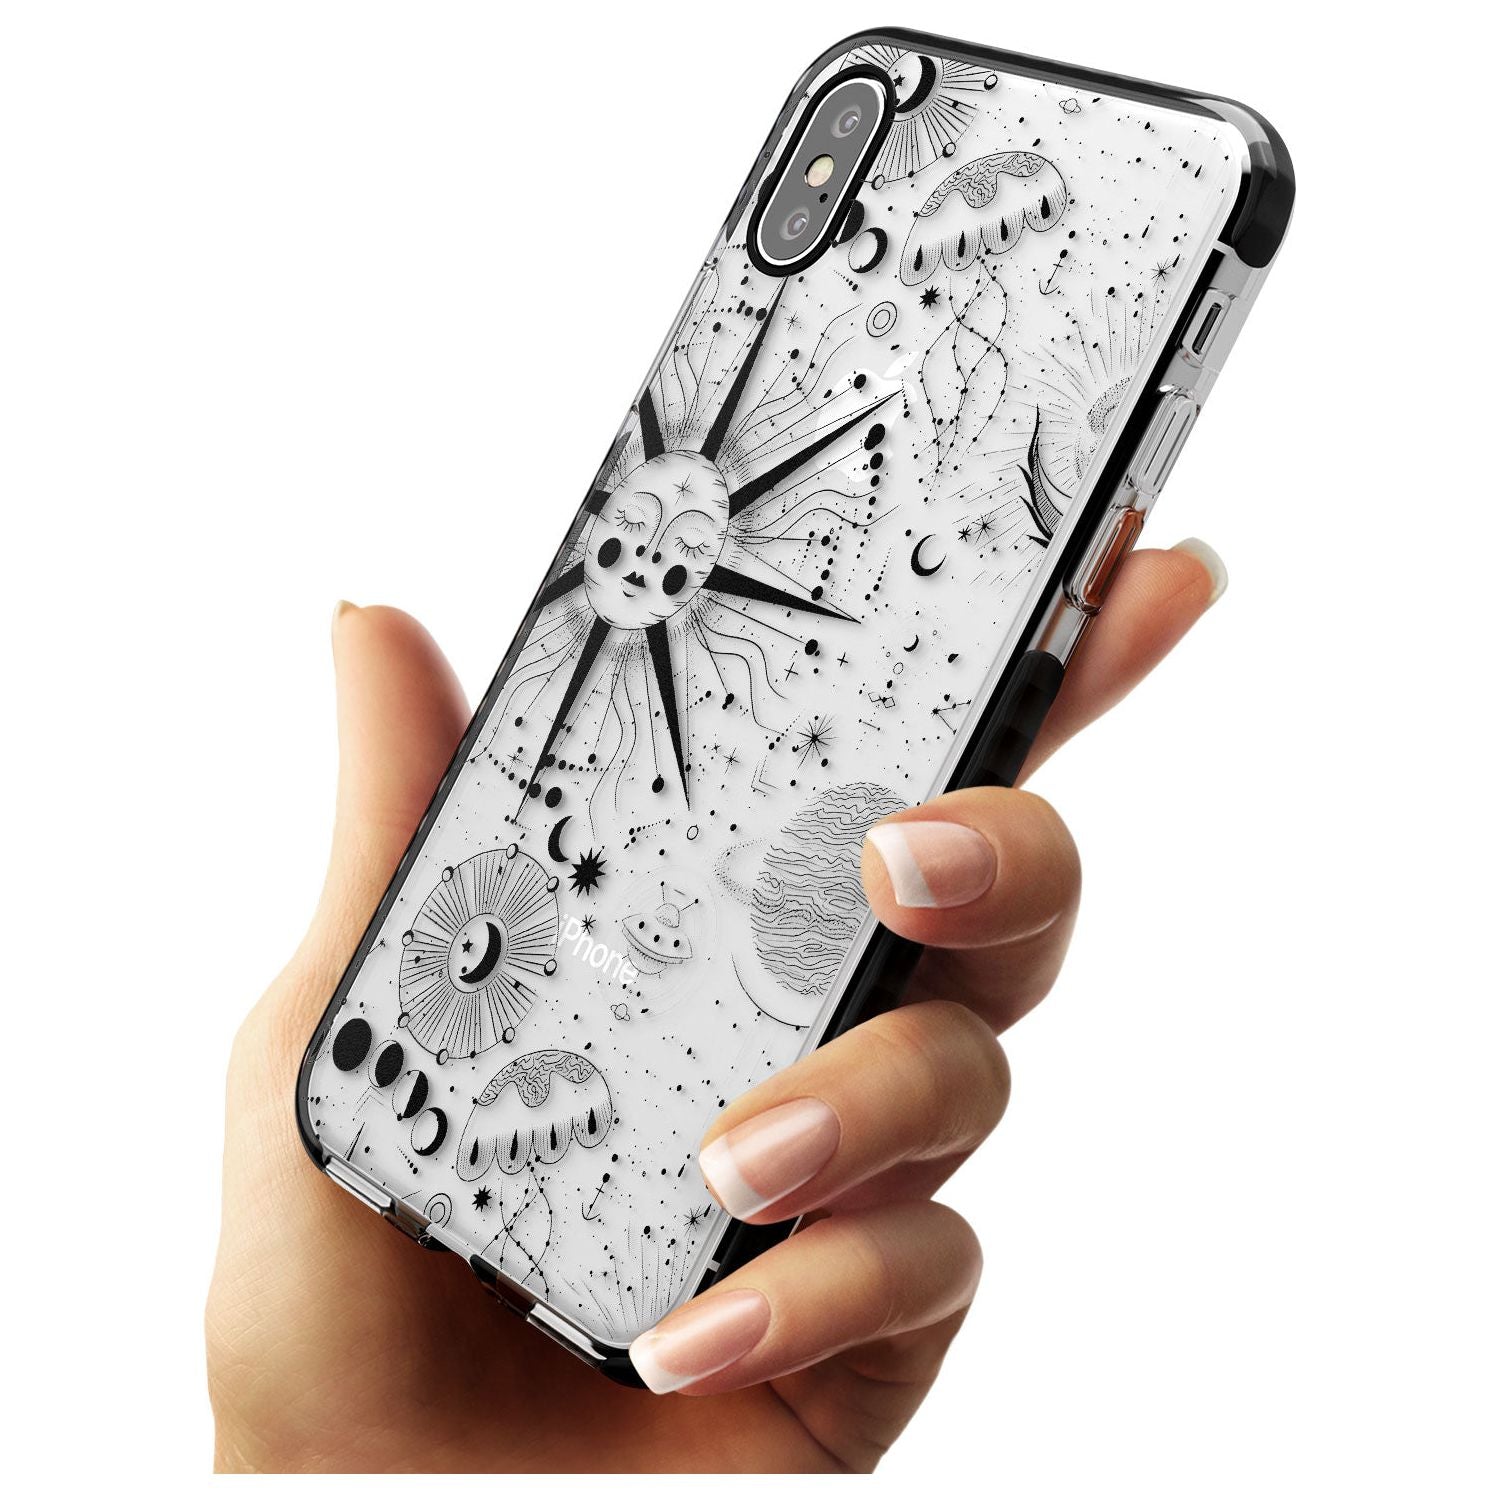 Large Sun Vintage Astrological Black Impact Phone Case for iPhone X XS Max XR